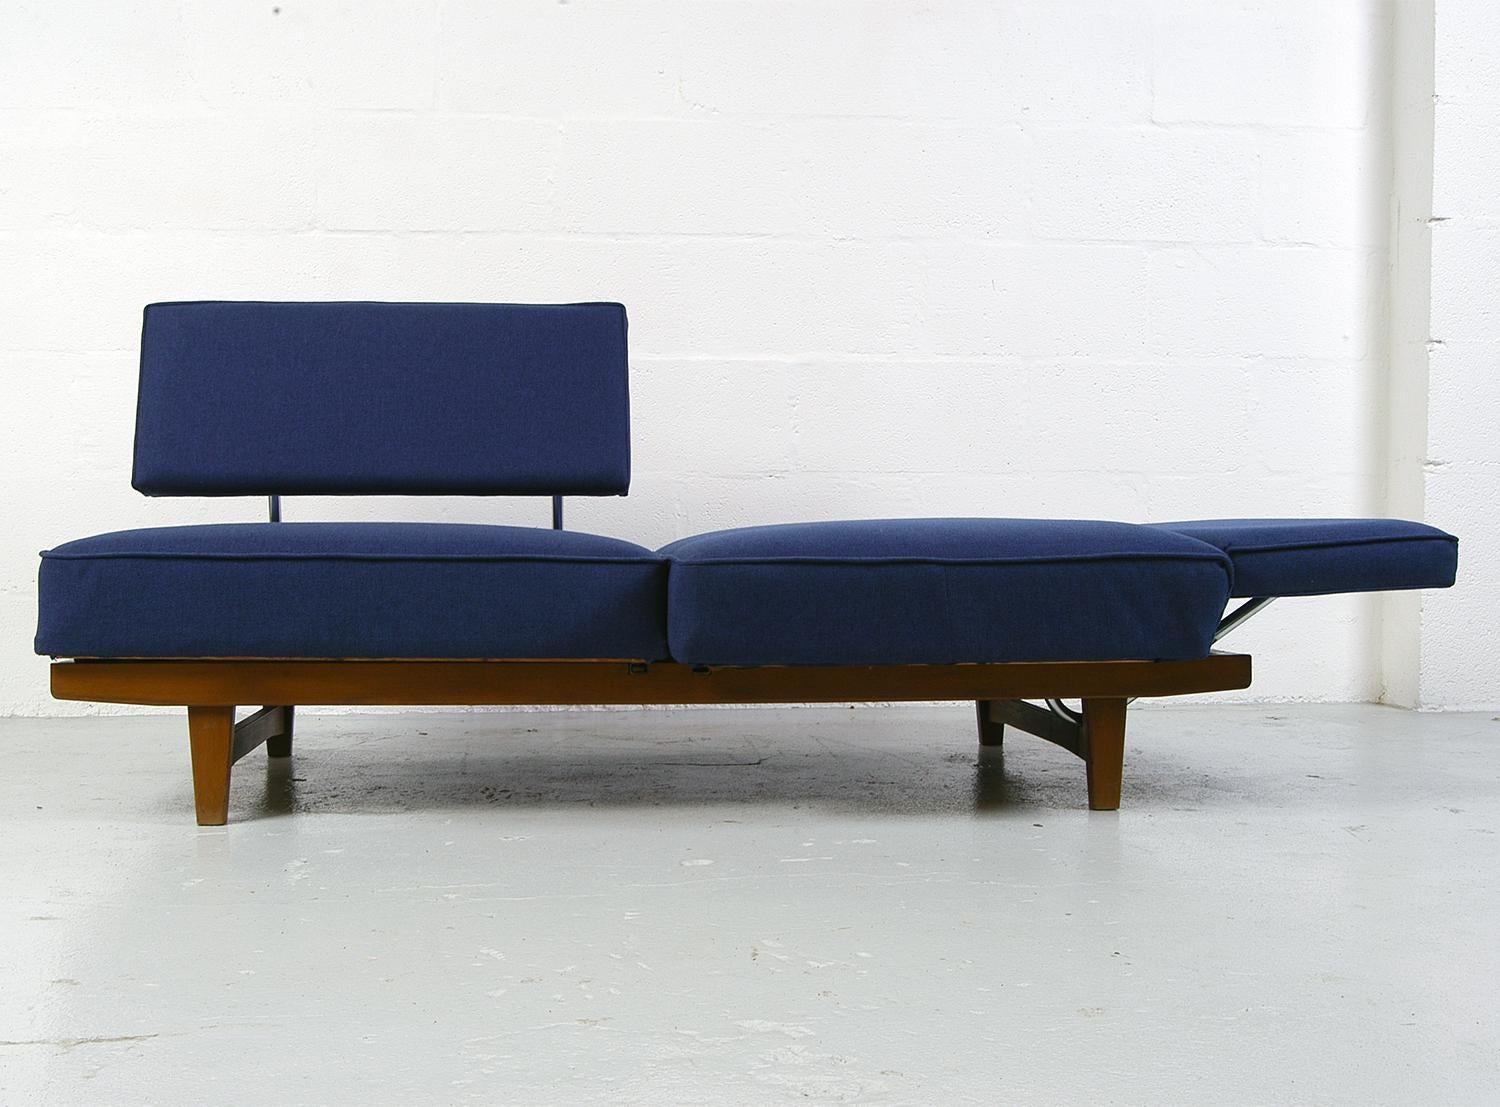 Upholstery Vintage 1950s Mid-Century Modern Knoll 'Stella’ Convertible Daybed Sofa Couch